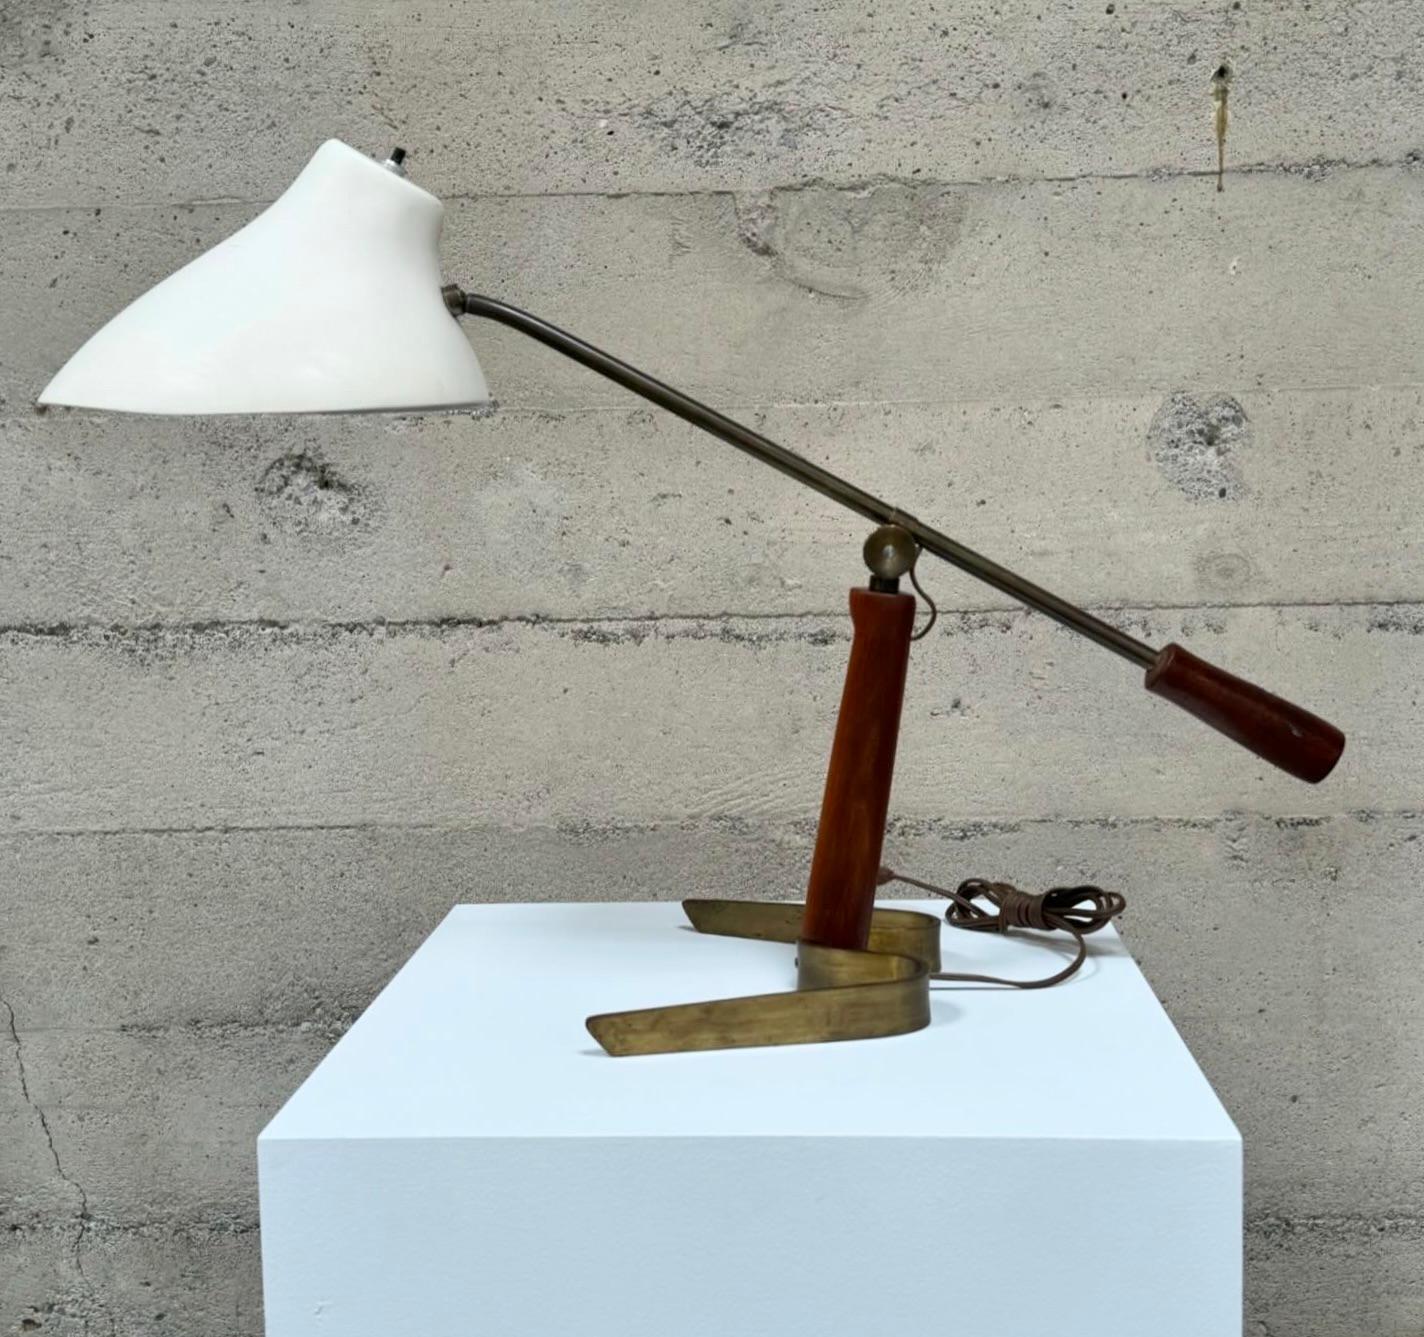 Adjustable Dutch table lamp with a ribbon brass base with a sculptural fiberglass shade and a wooden counterweight handle along with a wooden stem with a brass knob to tighten the adjustable arm. The main stem is set on an angle and gives the